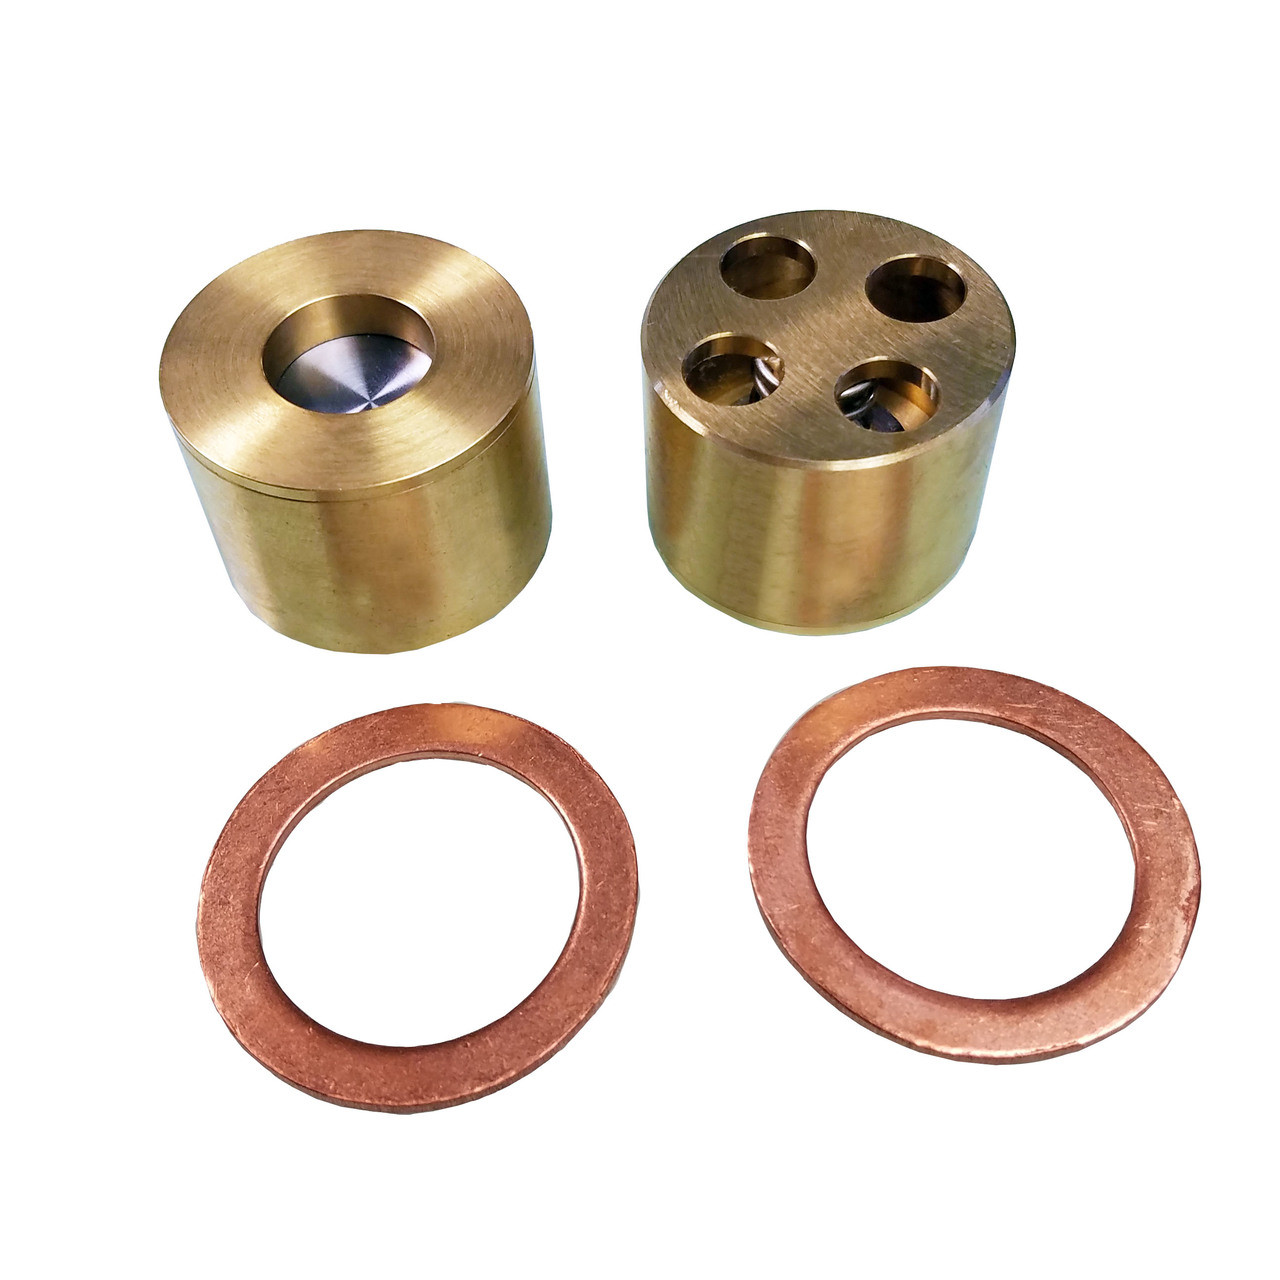 Suction / Discharge Valves and Gaskets for CO2 Pumps W50 and Cardox, Brass  Body